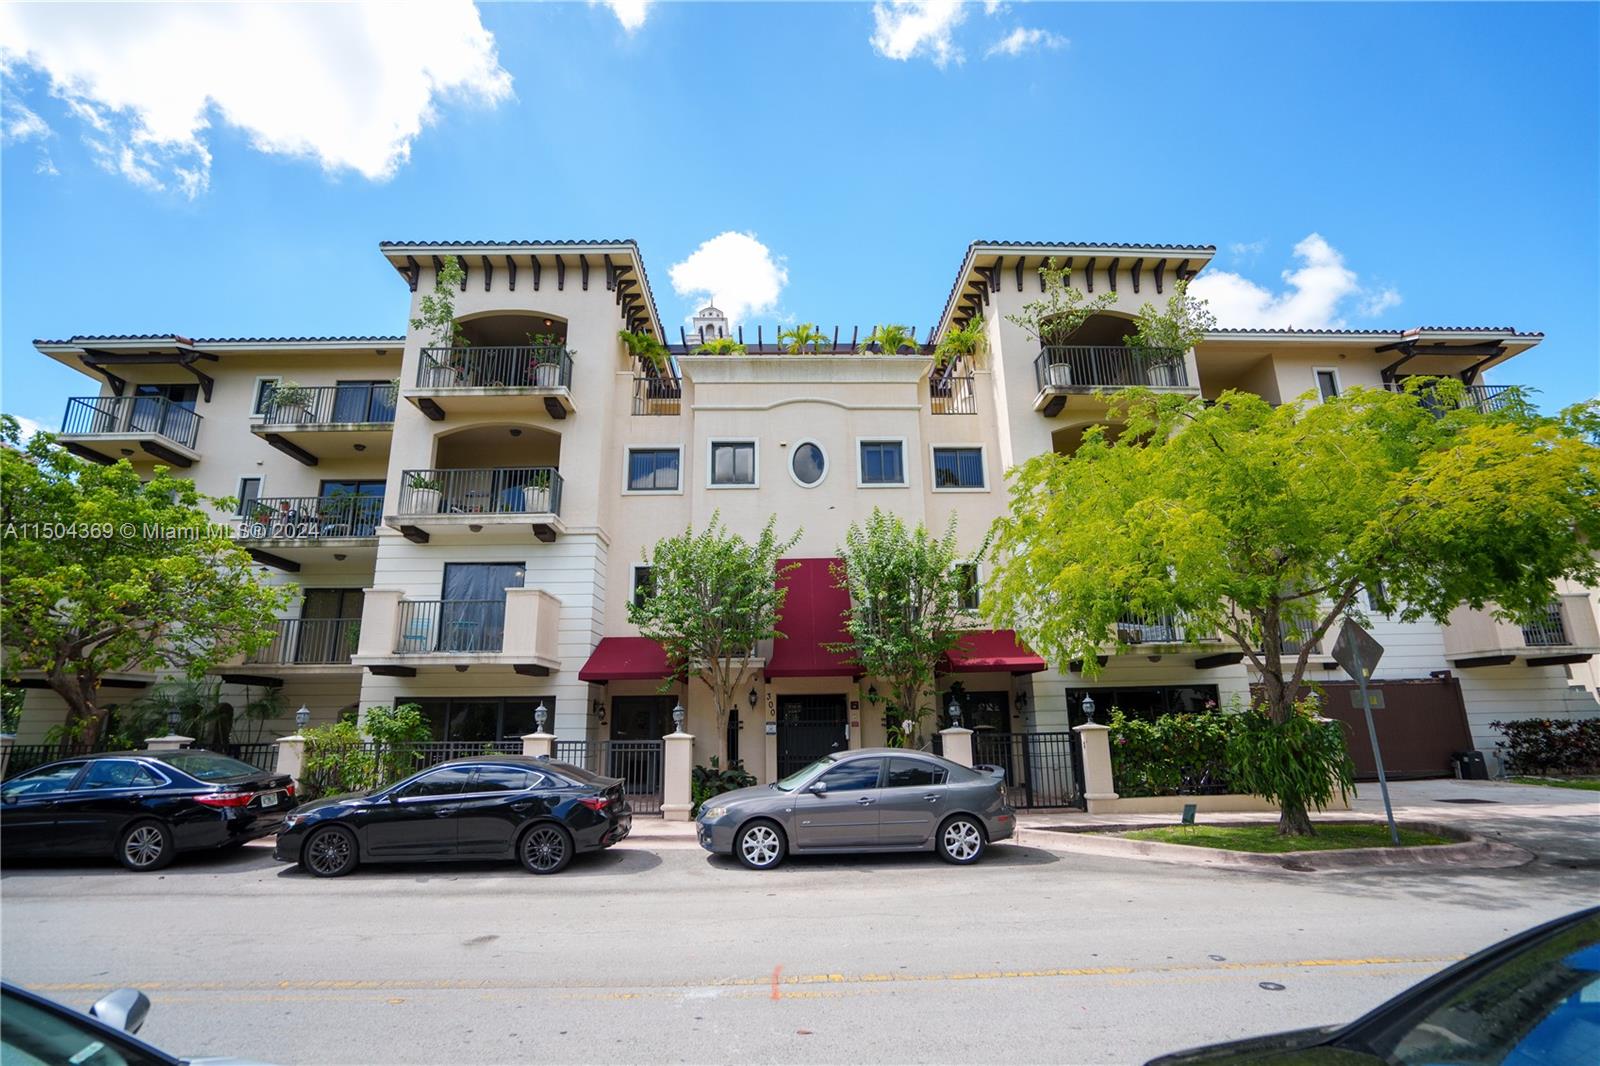 View Coral Gables, FL 33134 multi-family property